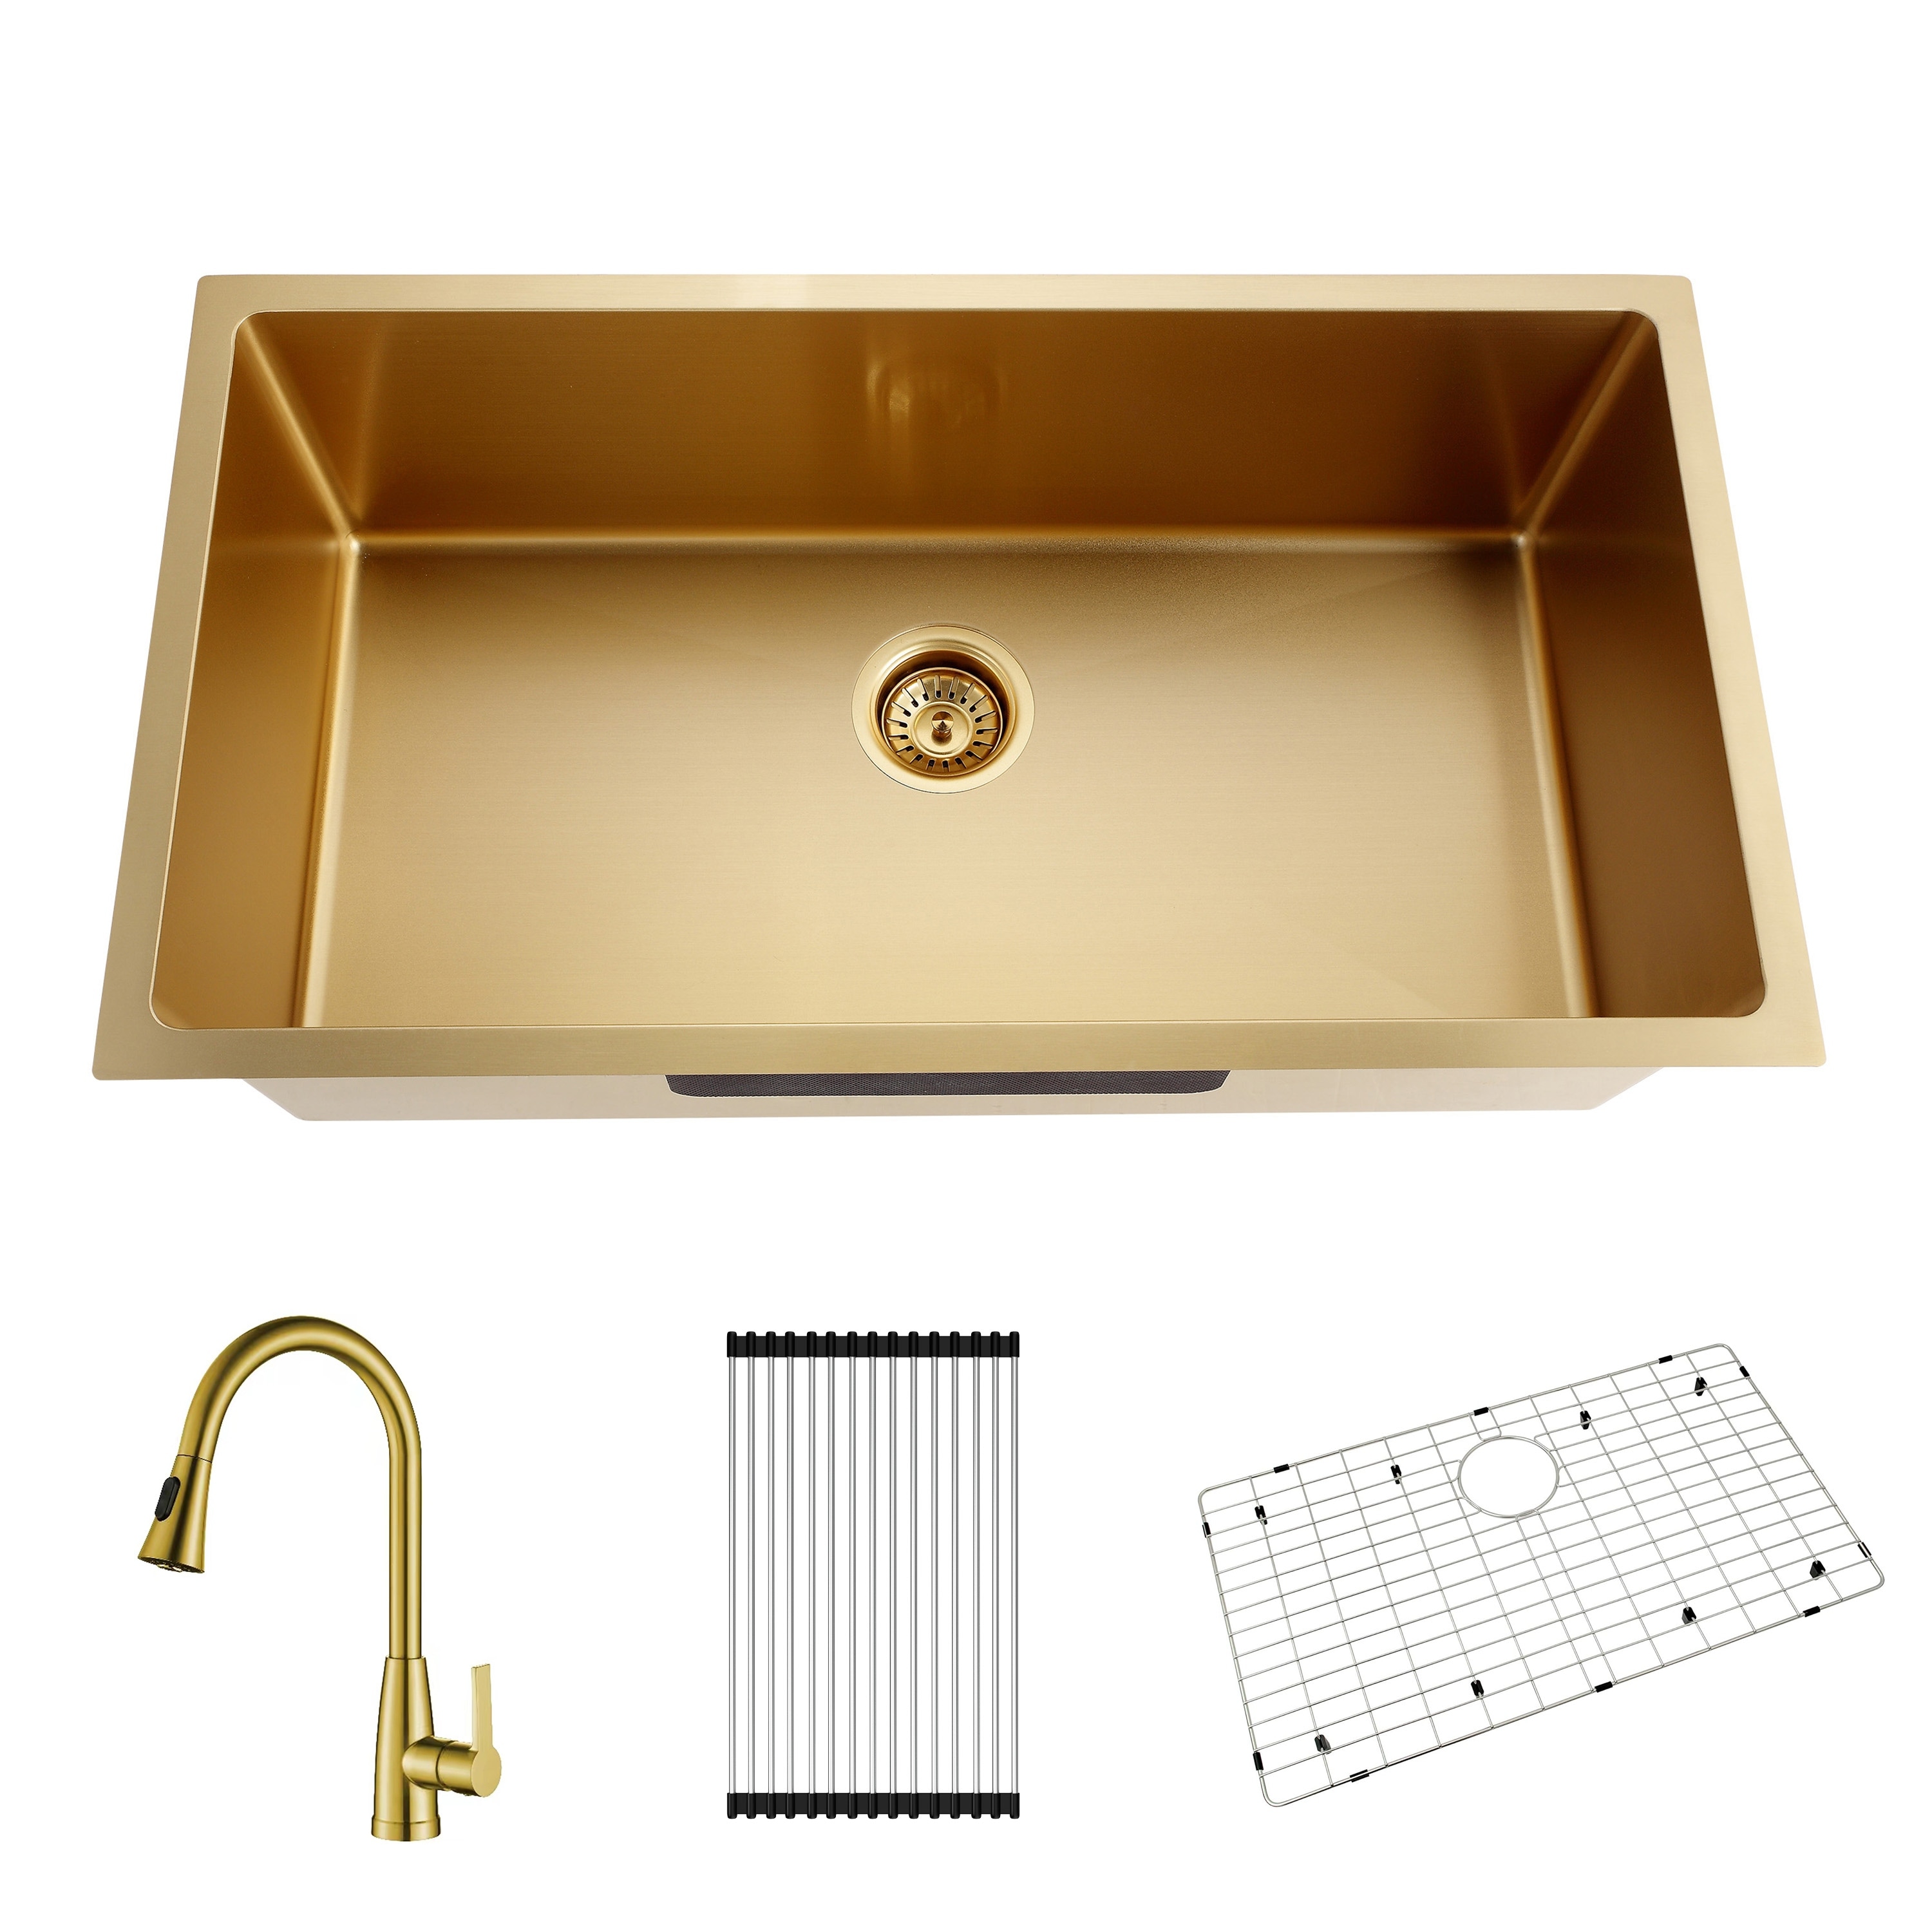 Roll Up Kitchen Sink Drying Rack in Gold Stainless Steel